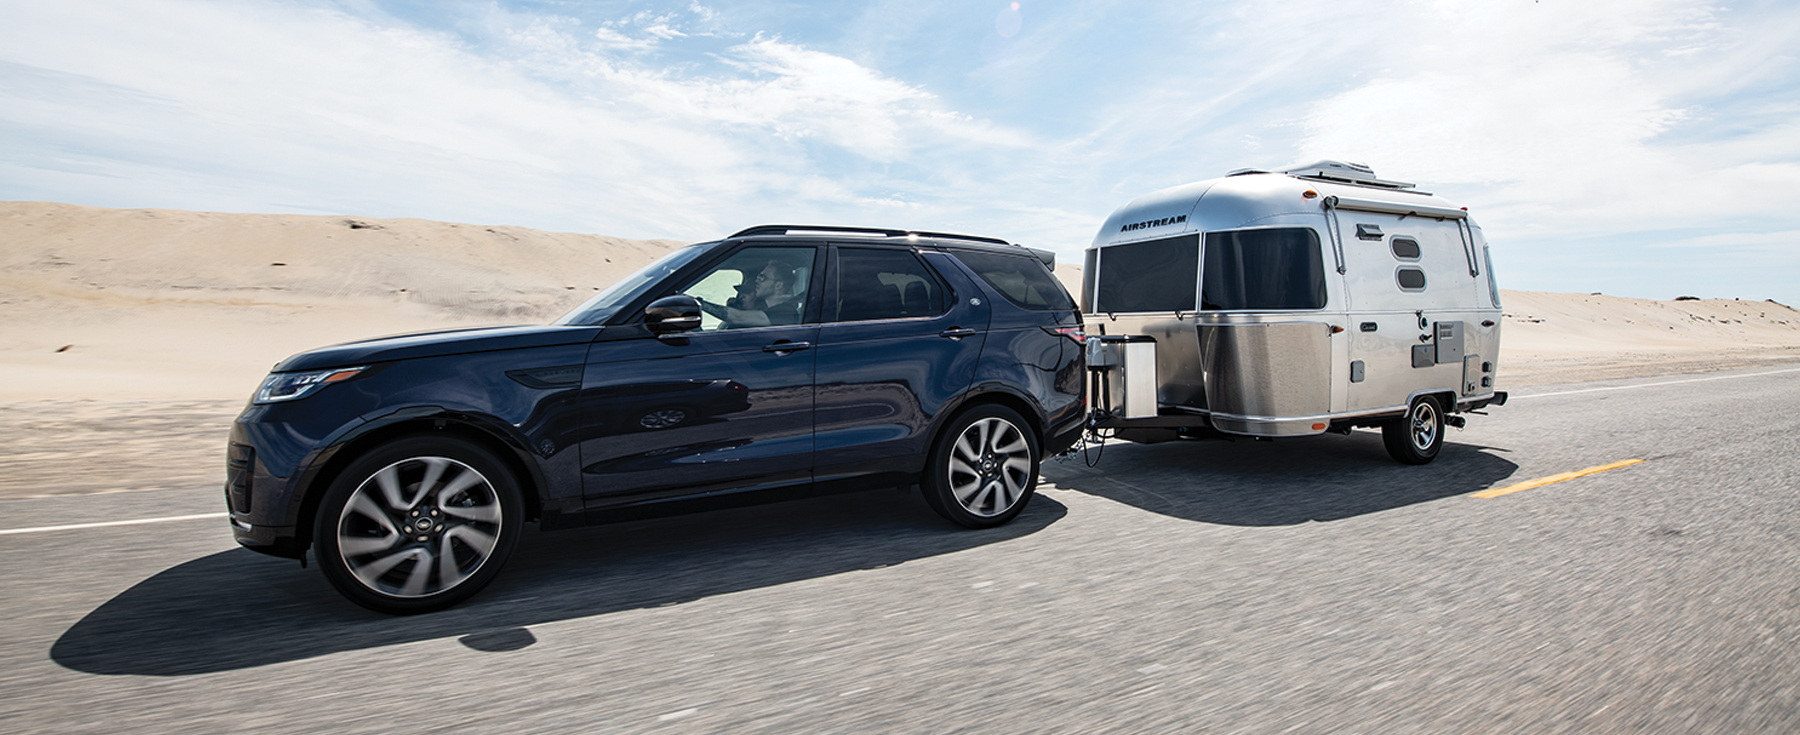 Airstream-towing-vehicle